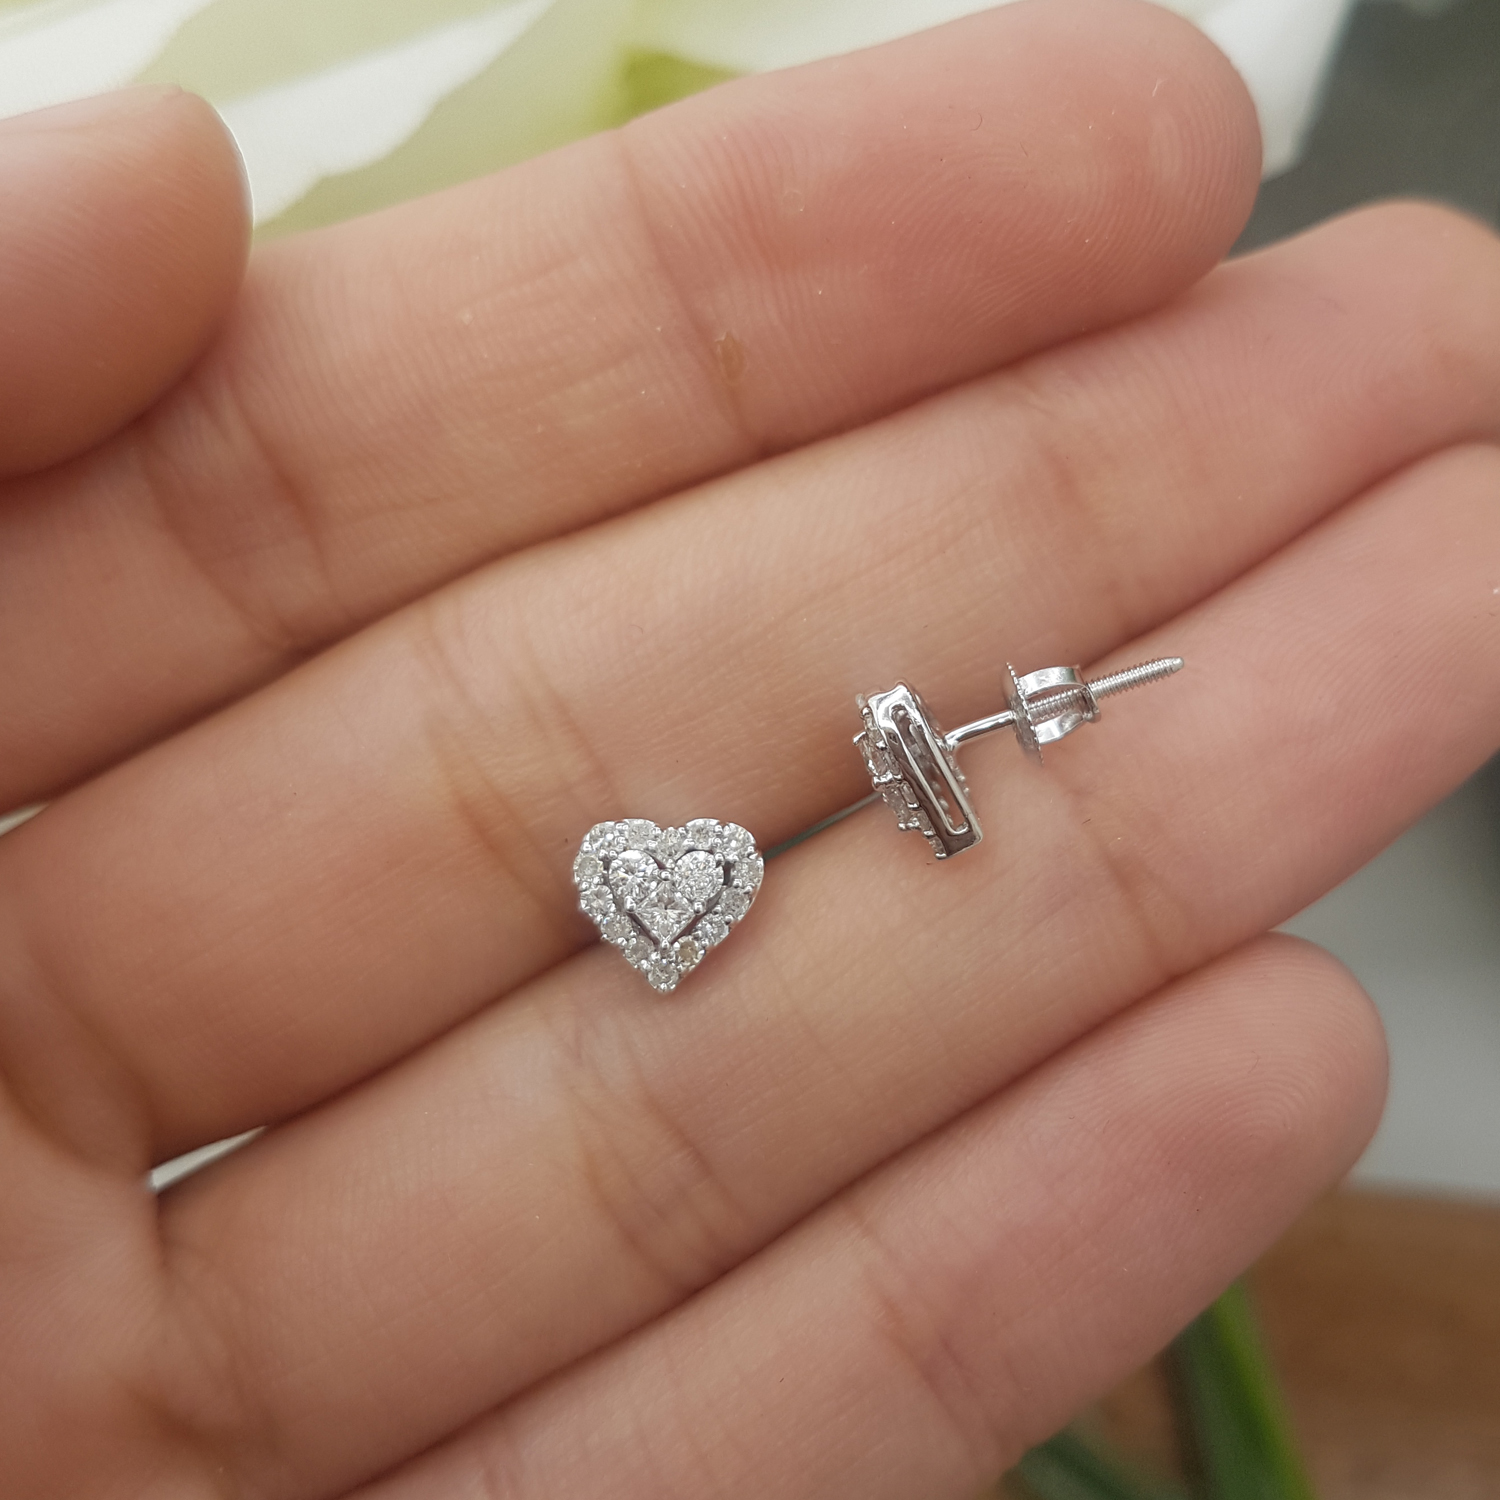 Buy 7 6 Mm 0 55 Carat Ctw 10k White Gold Round And Princess White Diamond Heart Shaped Earrings